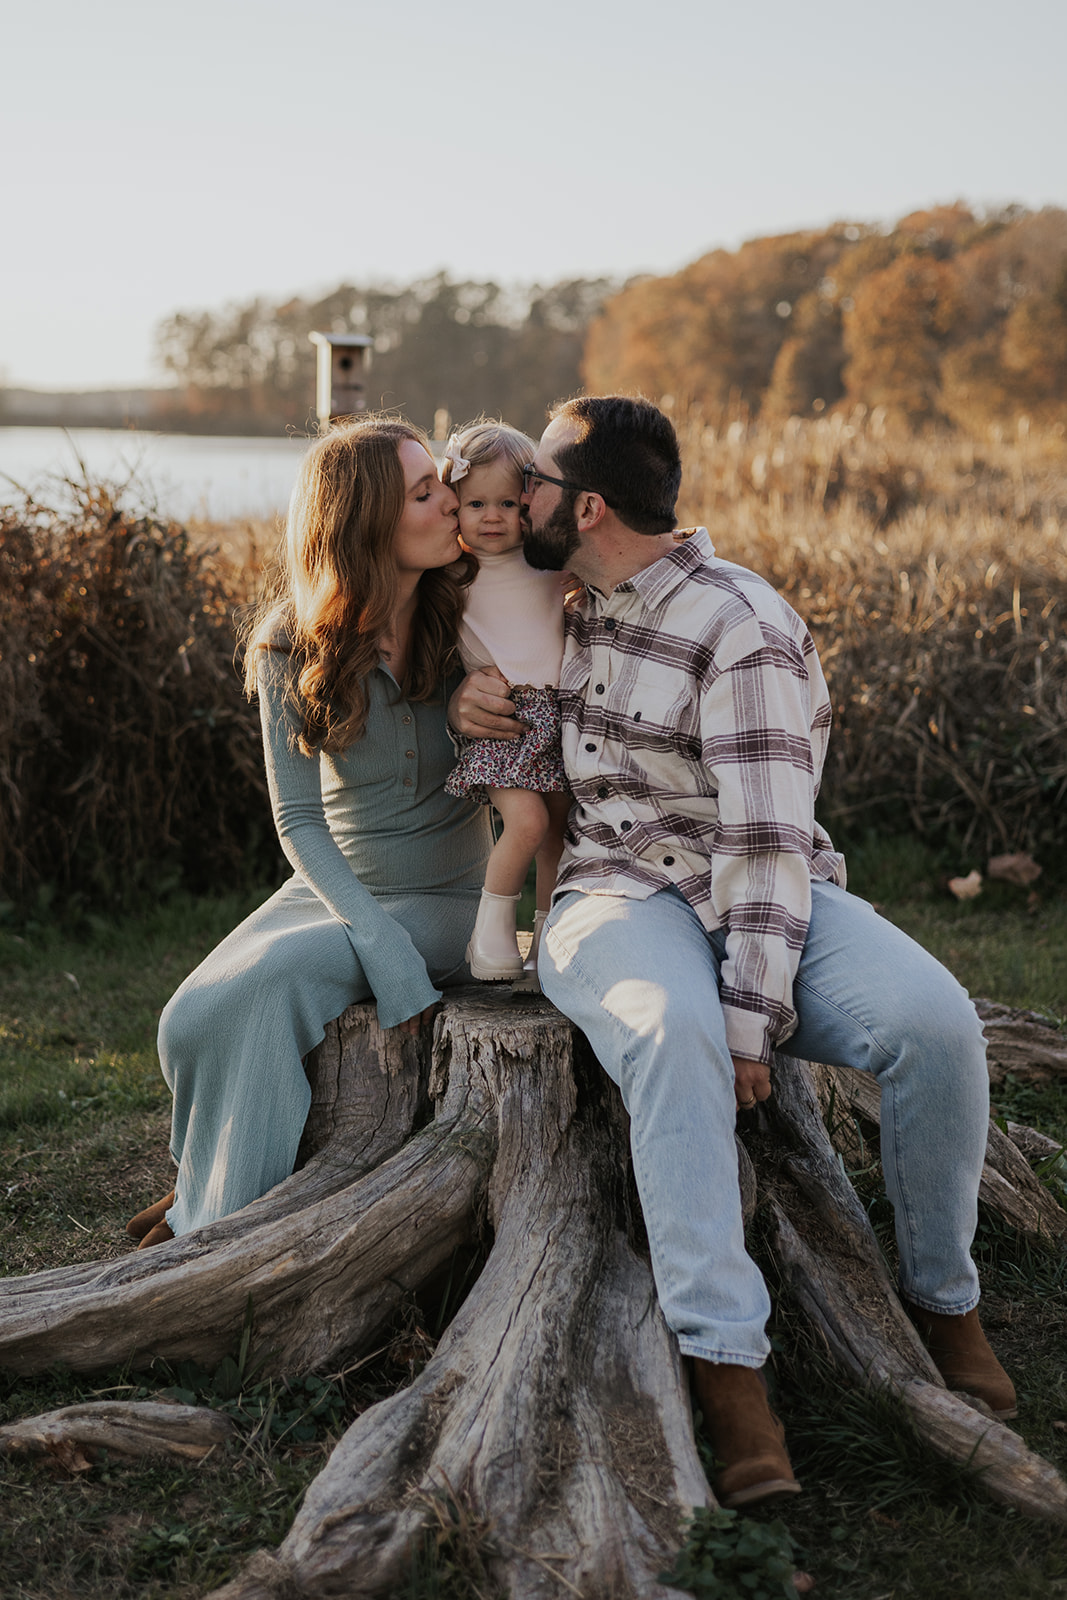 Mom and dad give their young daughter a kiss on the cheek during their Georgia family photoshoot